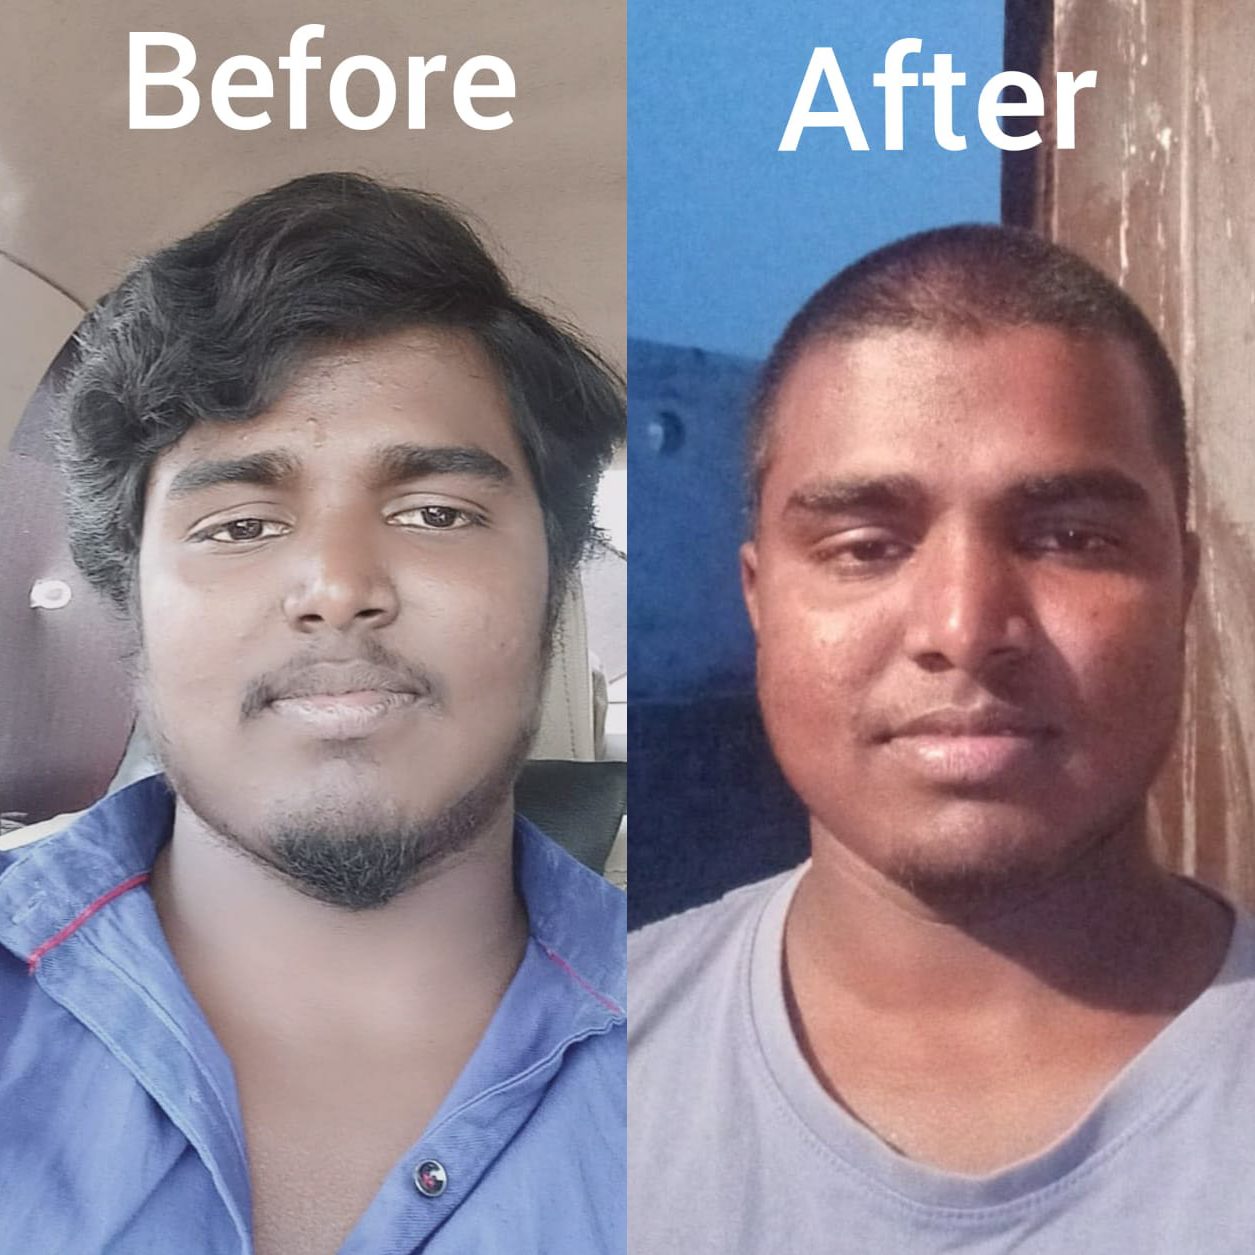 Before and after comparison photos of Srikanth after a change to his haircut and facial hair